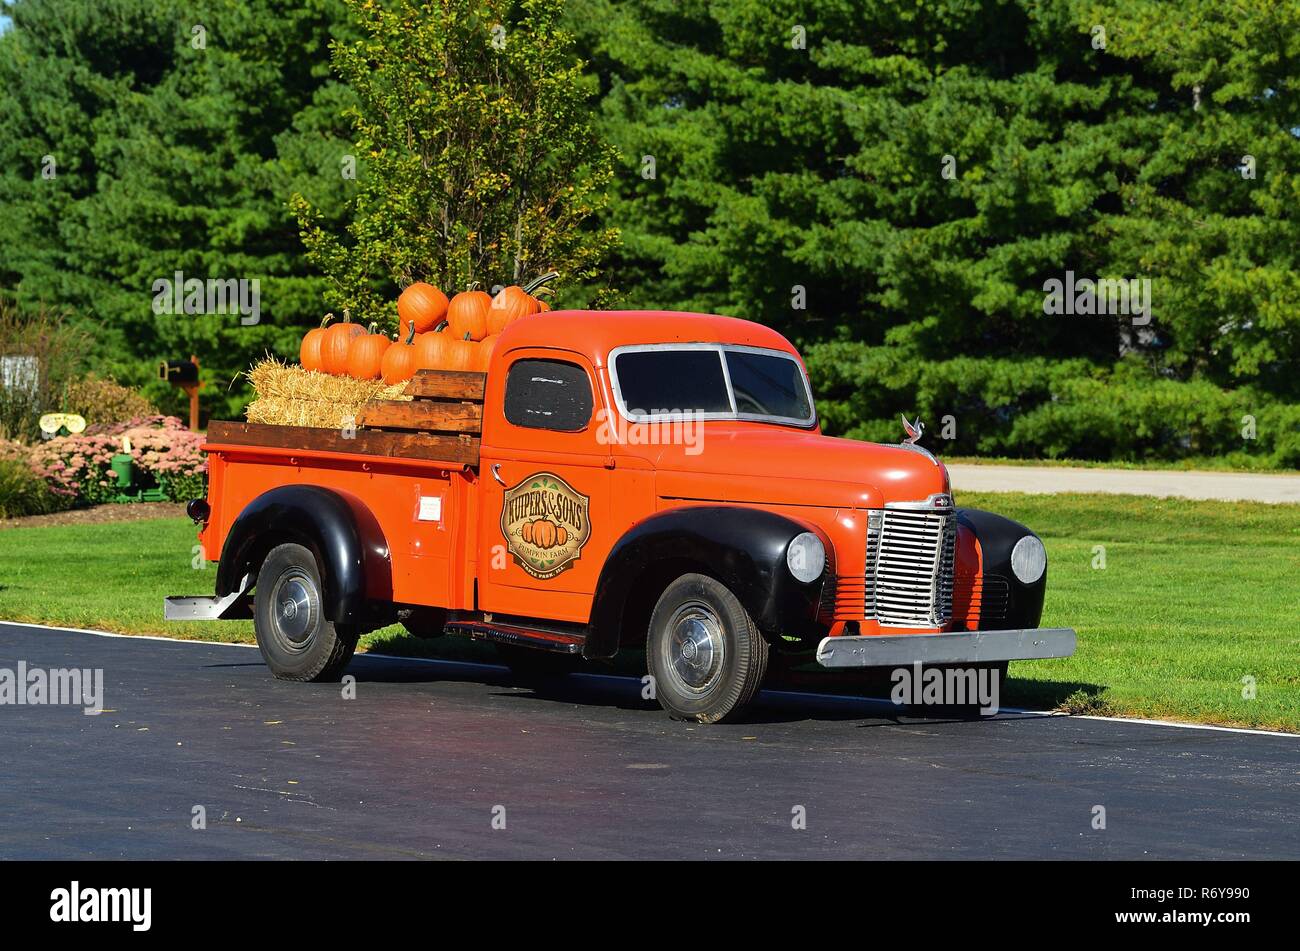 Maple Park, Illinois, USA. A decorated vintage pick-up truck heralds the onset of fall at a rural pumpkin farm in northeastern Illinois. Stock Photo